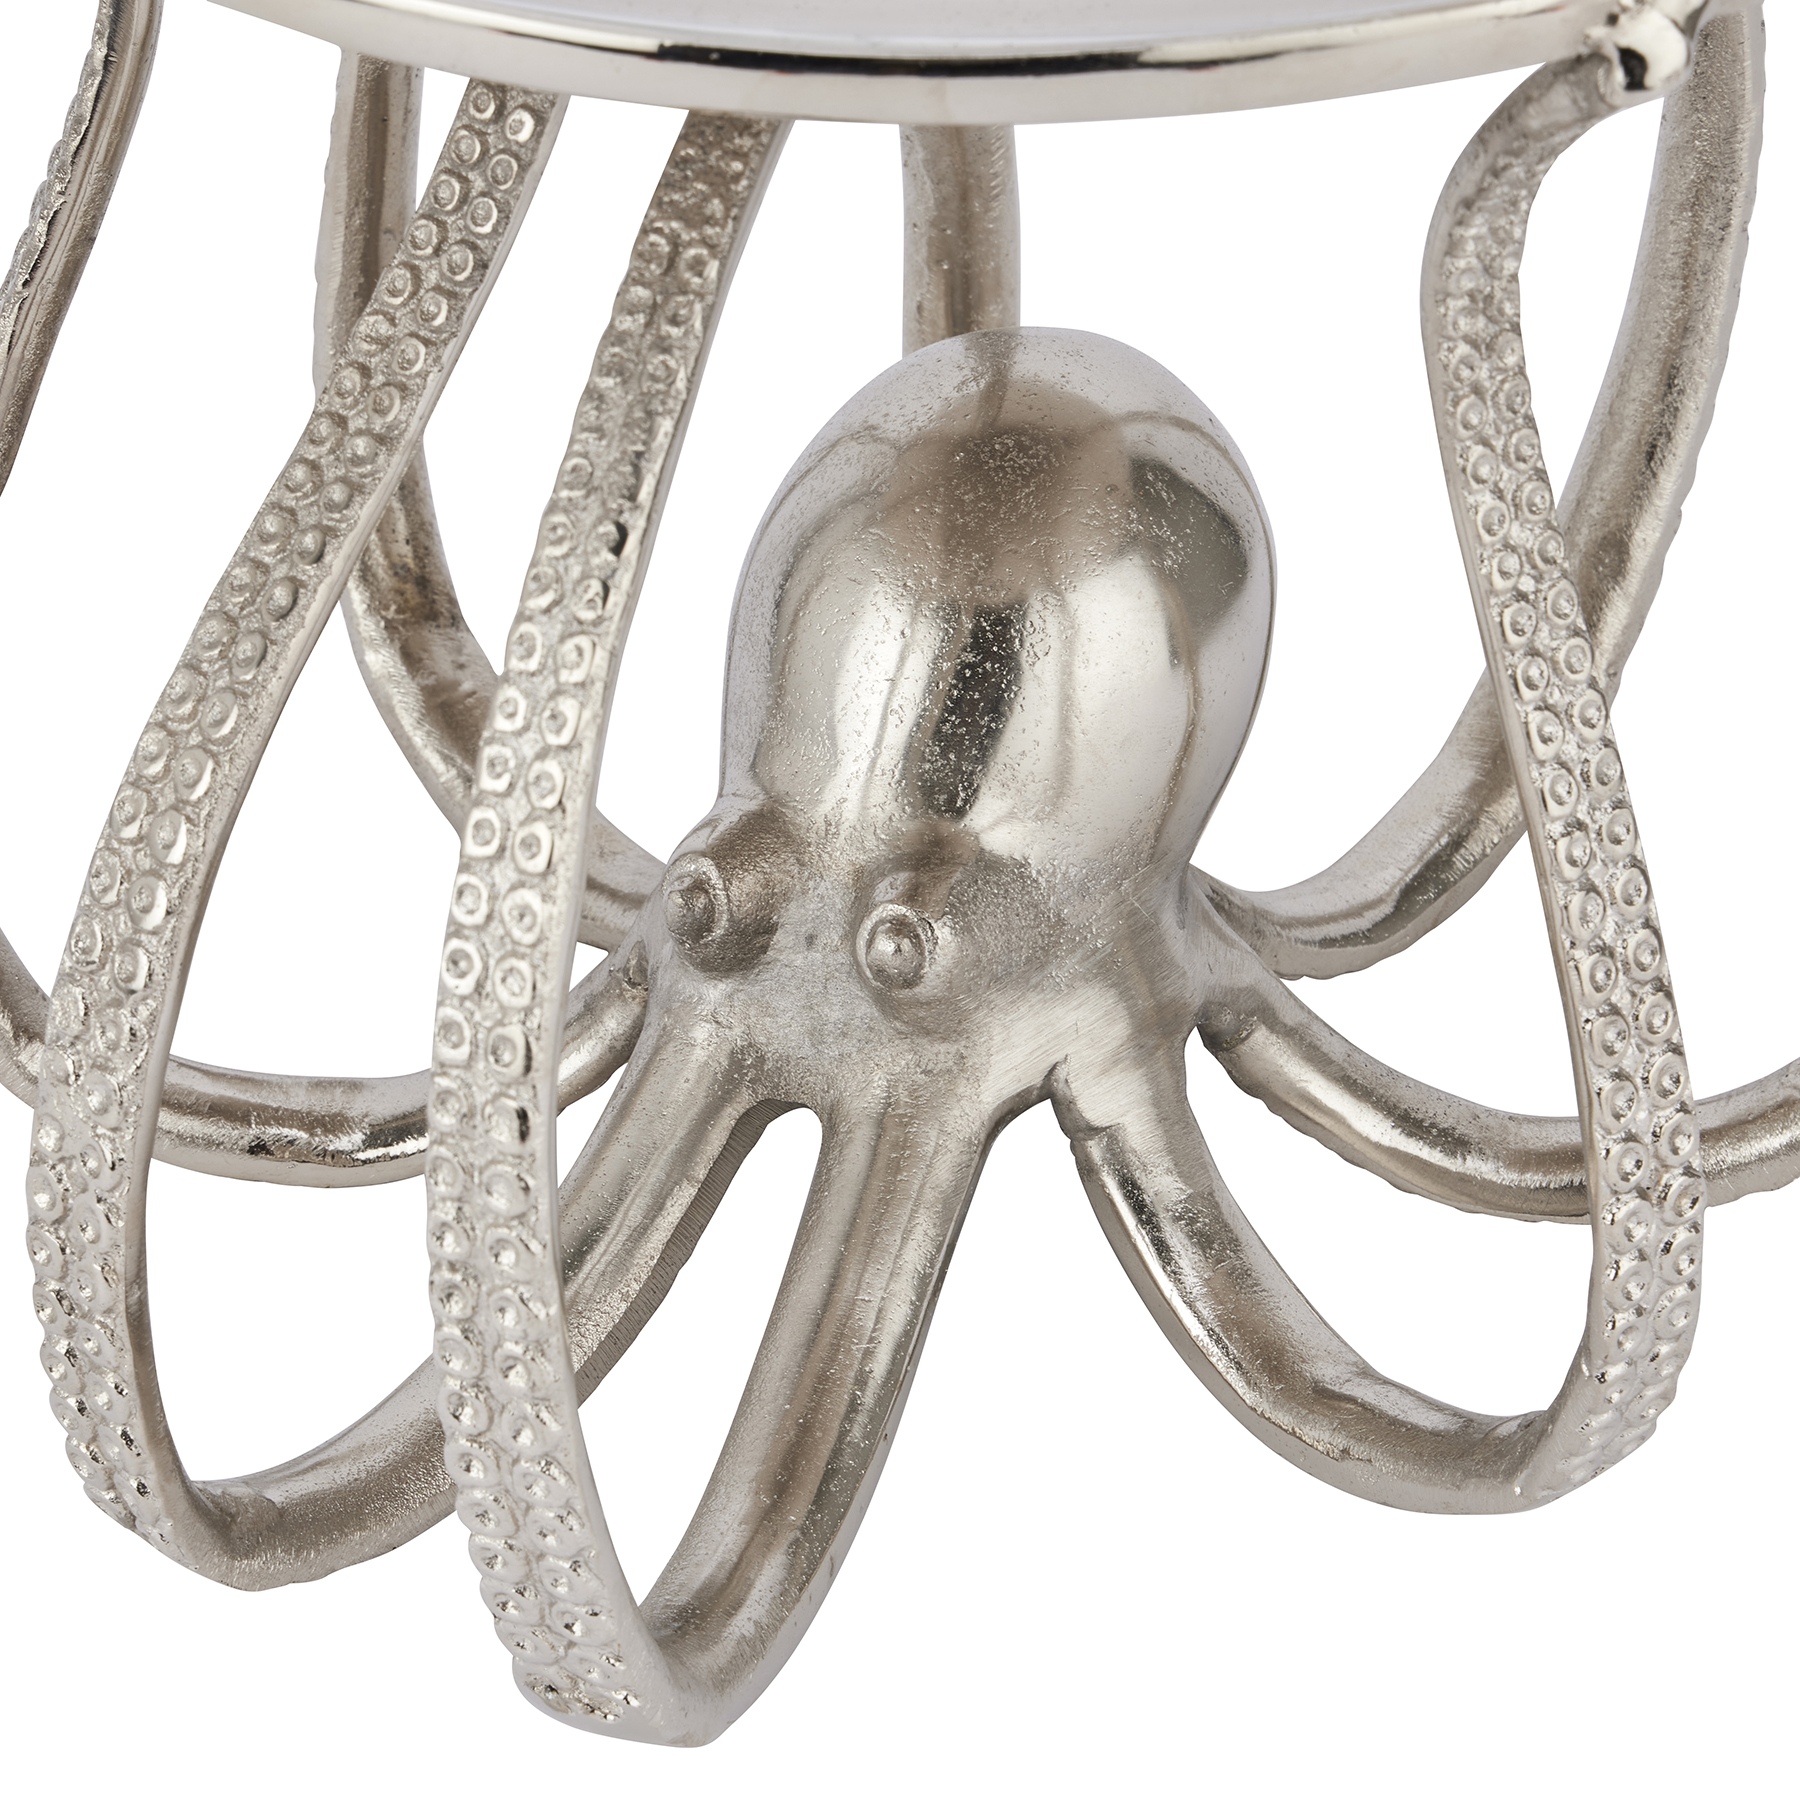 Large Silver Octopus Cake Stand Cloche - Image 2